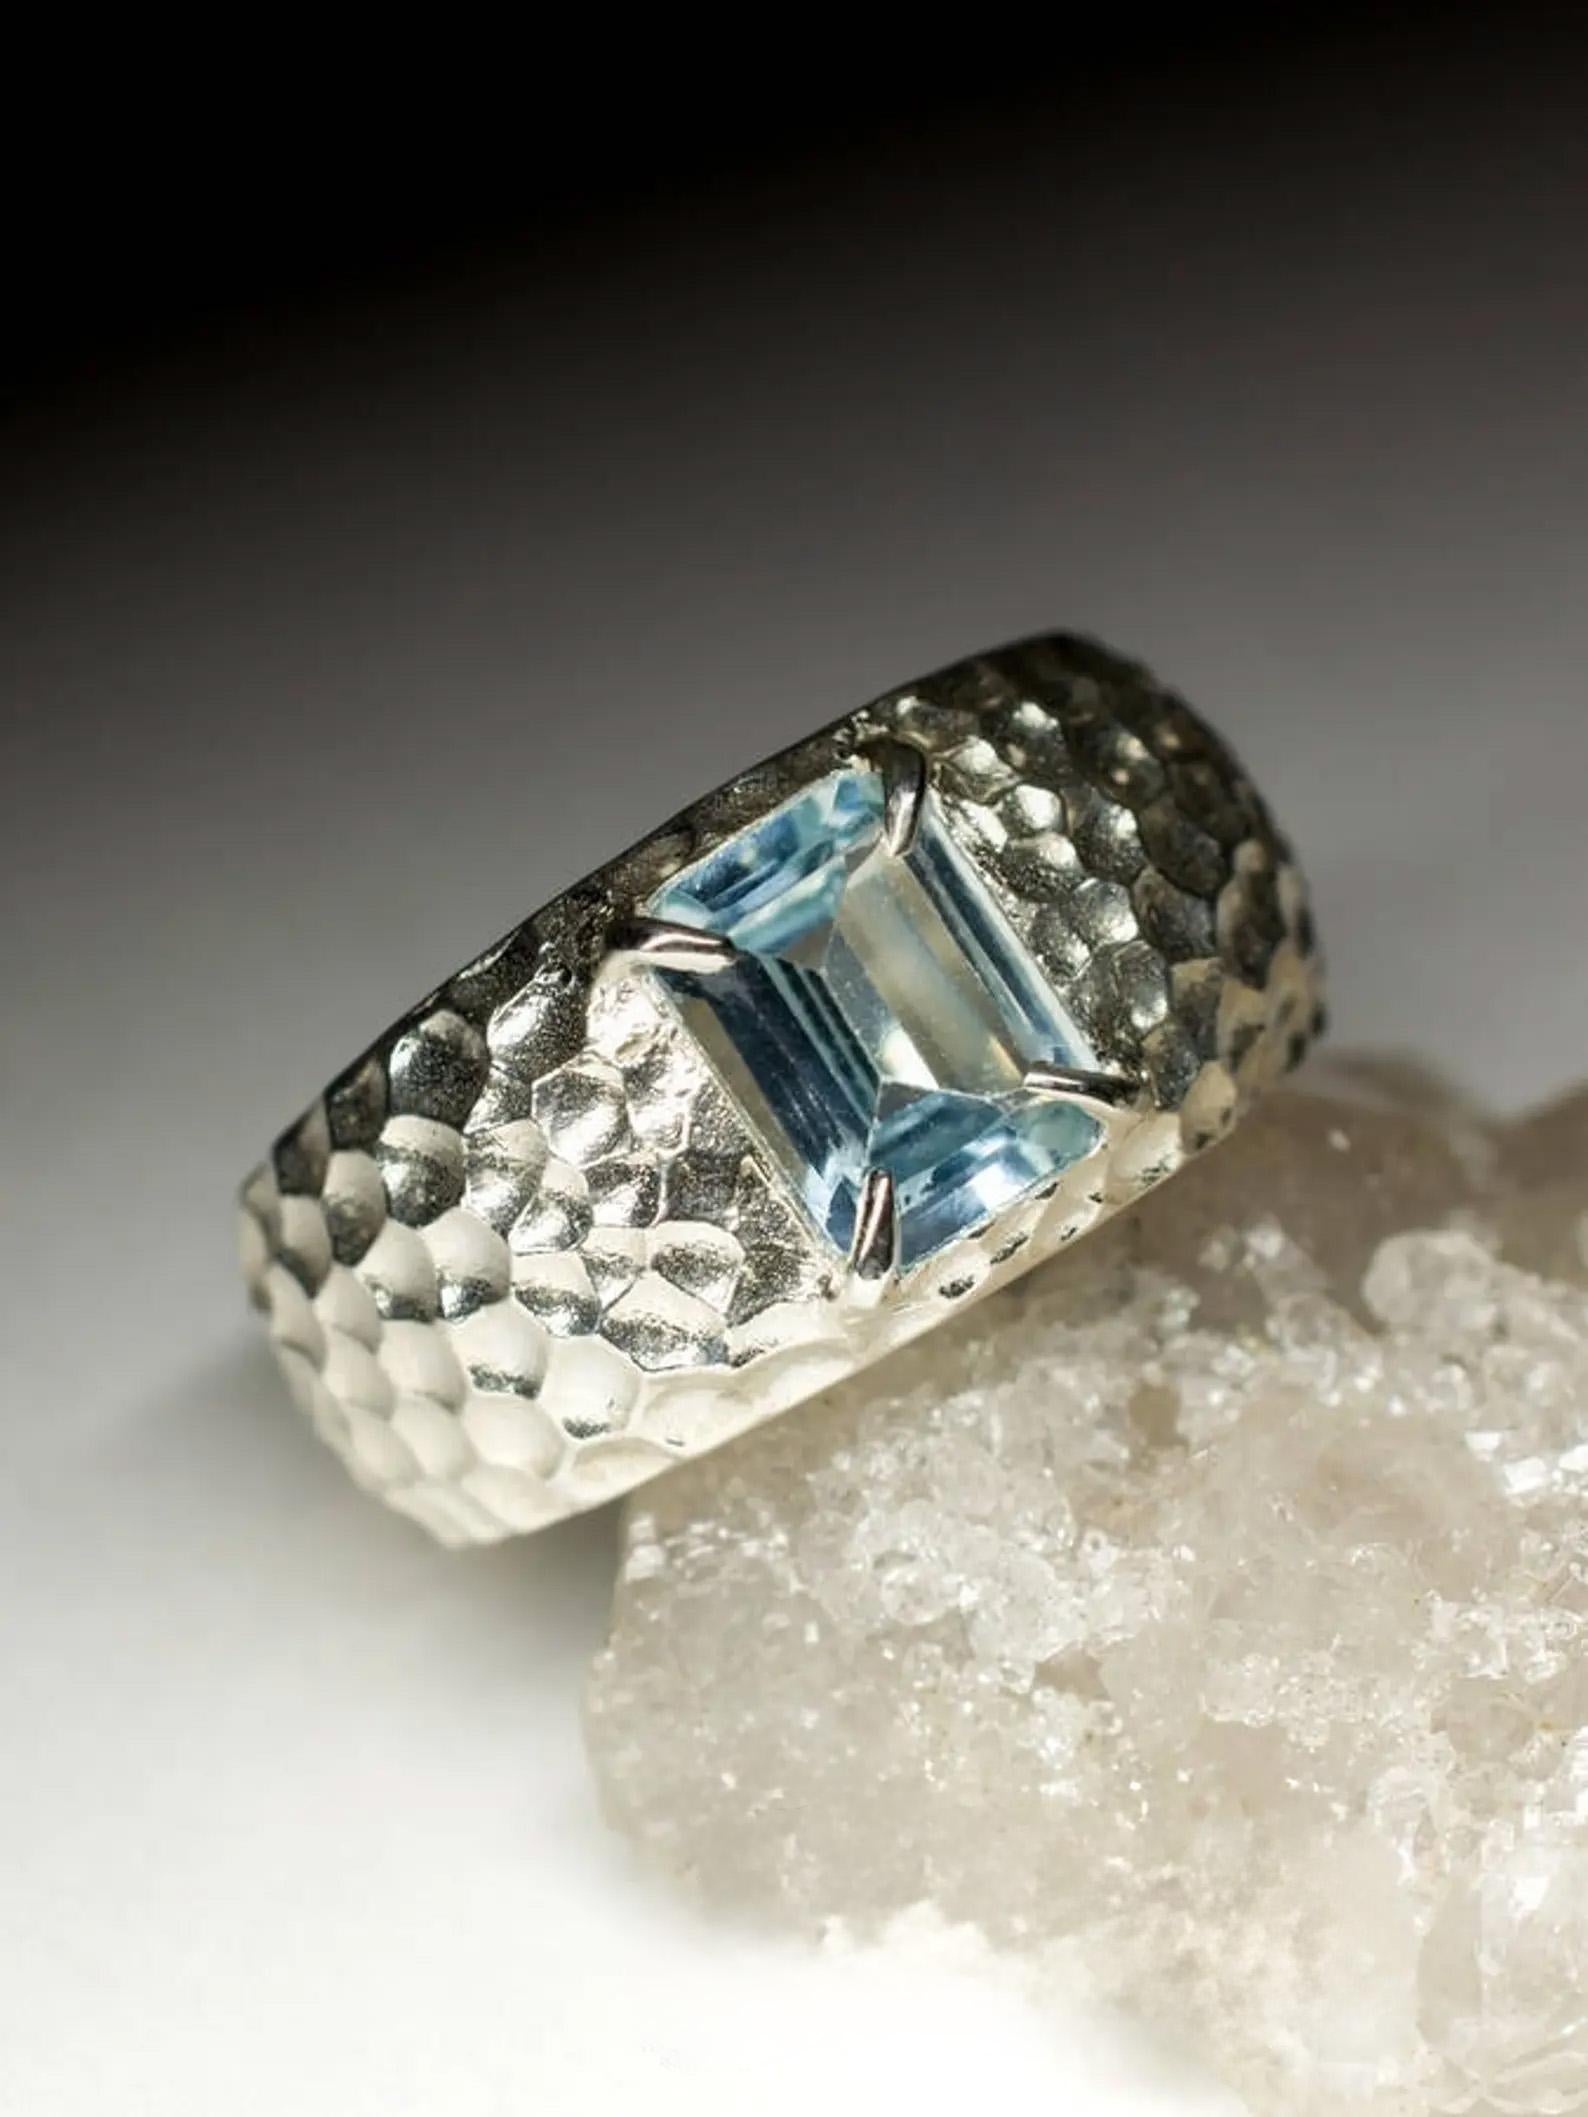 Silver matte finished ring with natural Aquamarine in fancy emerald cut
aquamarine origin - Brazil
ring weight - 7.87 grams
ring size - 6.25 US 
stone measurements - 0.12 x 0.24 x 0.31 in / 3 х 6 х 8 mm
